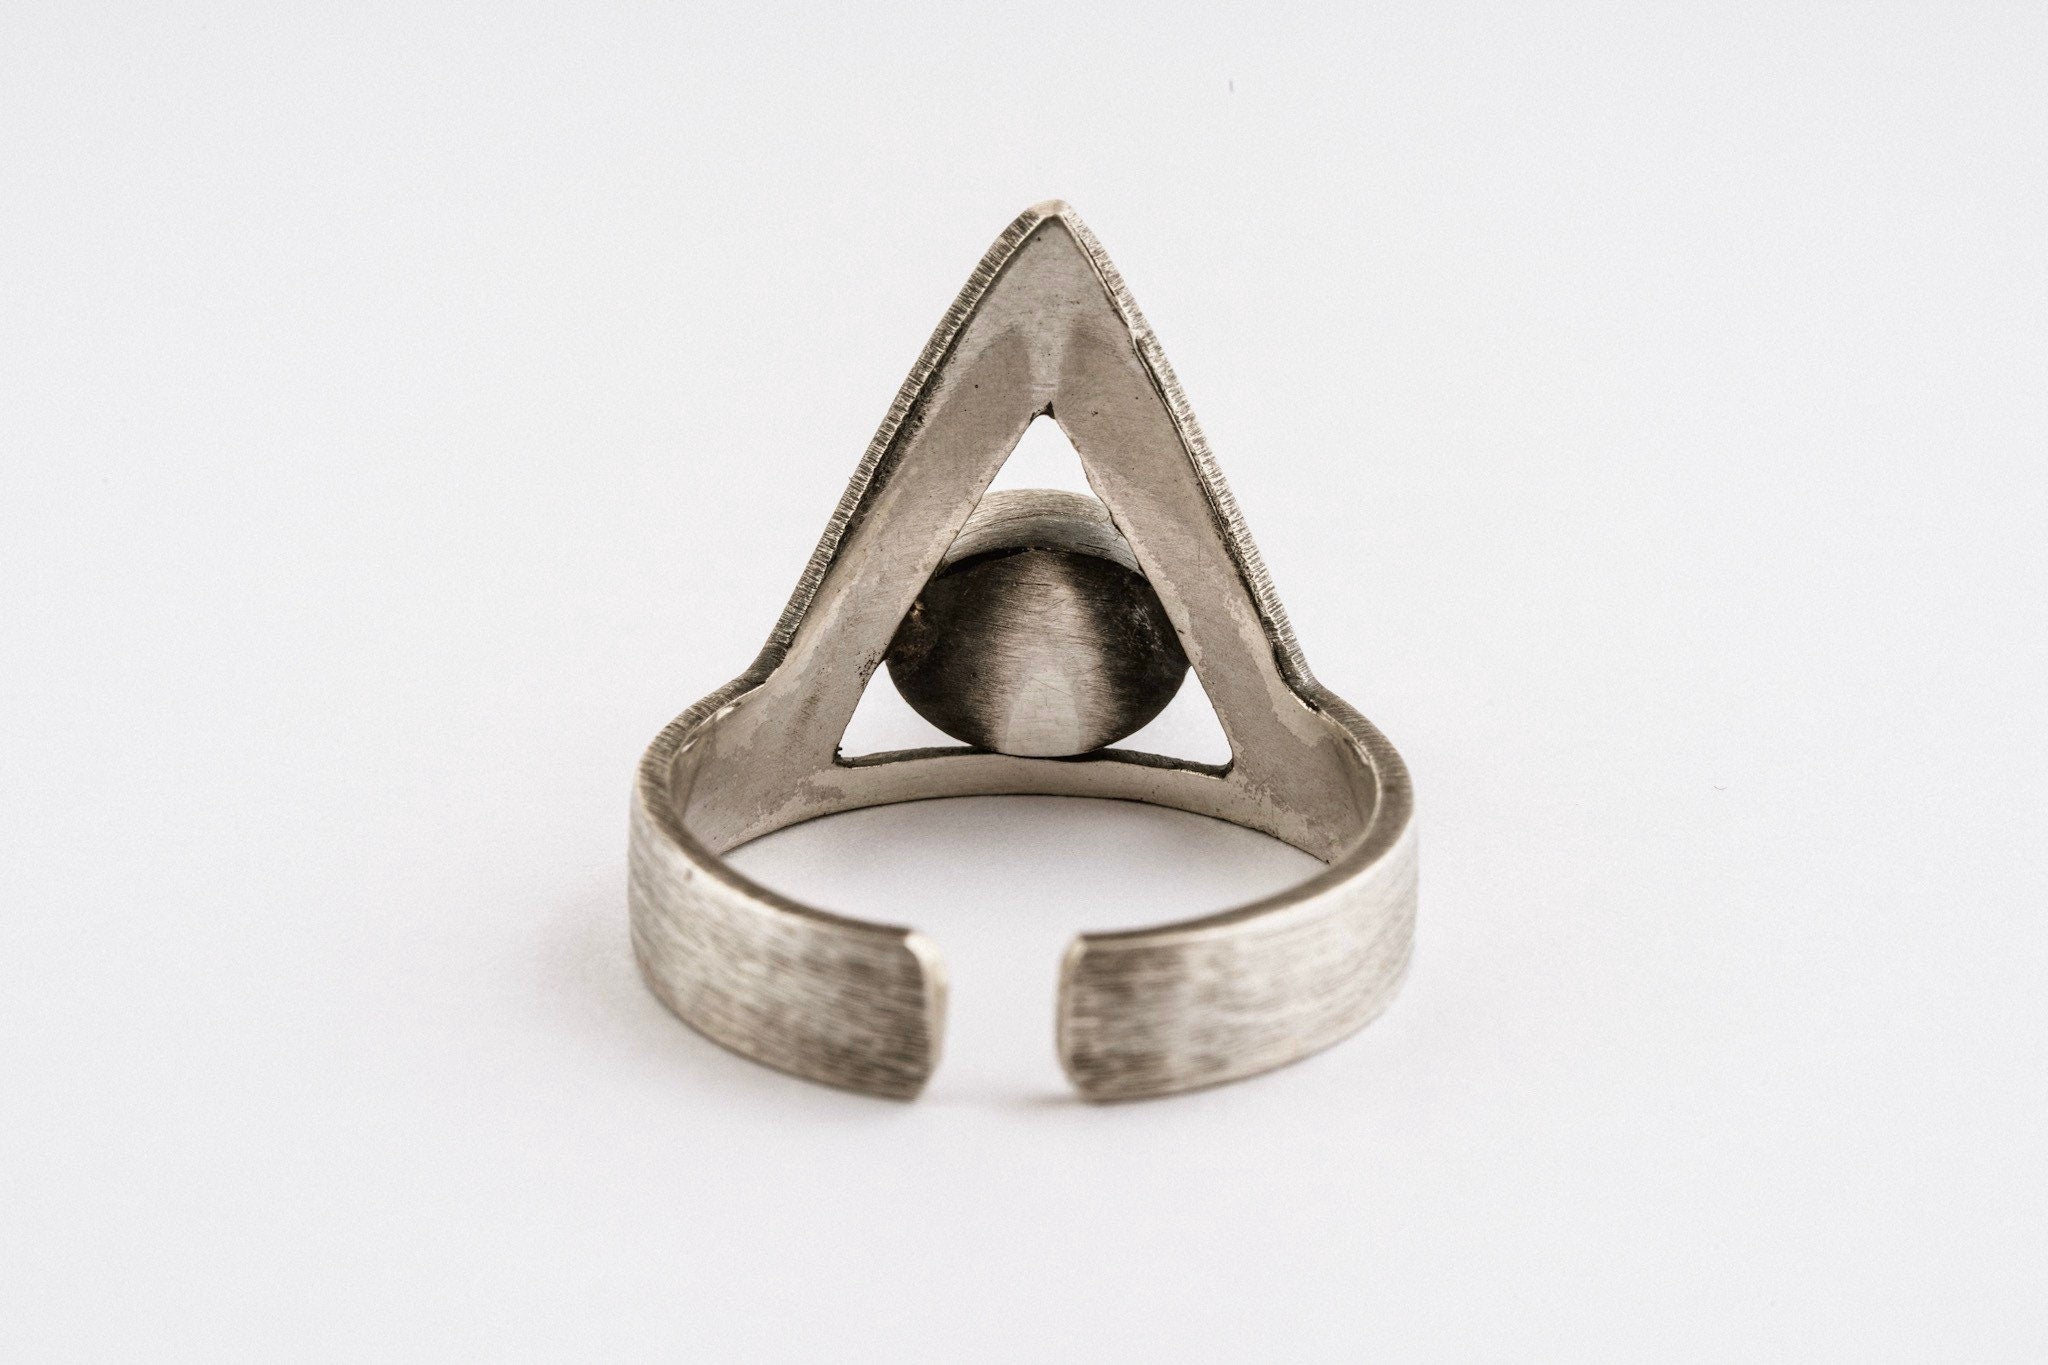 Turquoise Ring - Hammered OR Brushed oxidised Triangle - 925 Sterling Silver - Open ADJUSTABLE - Size 5-10 US